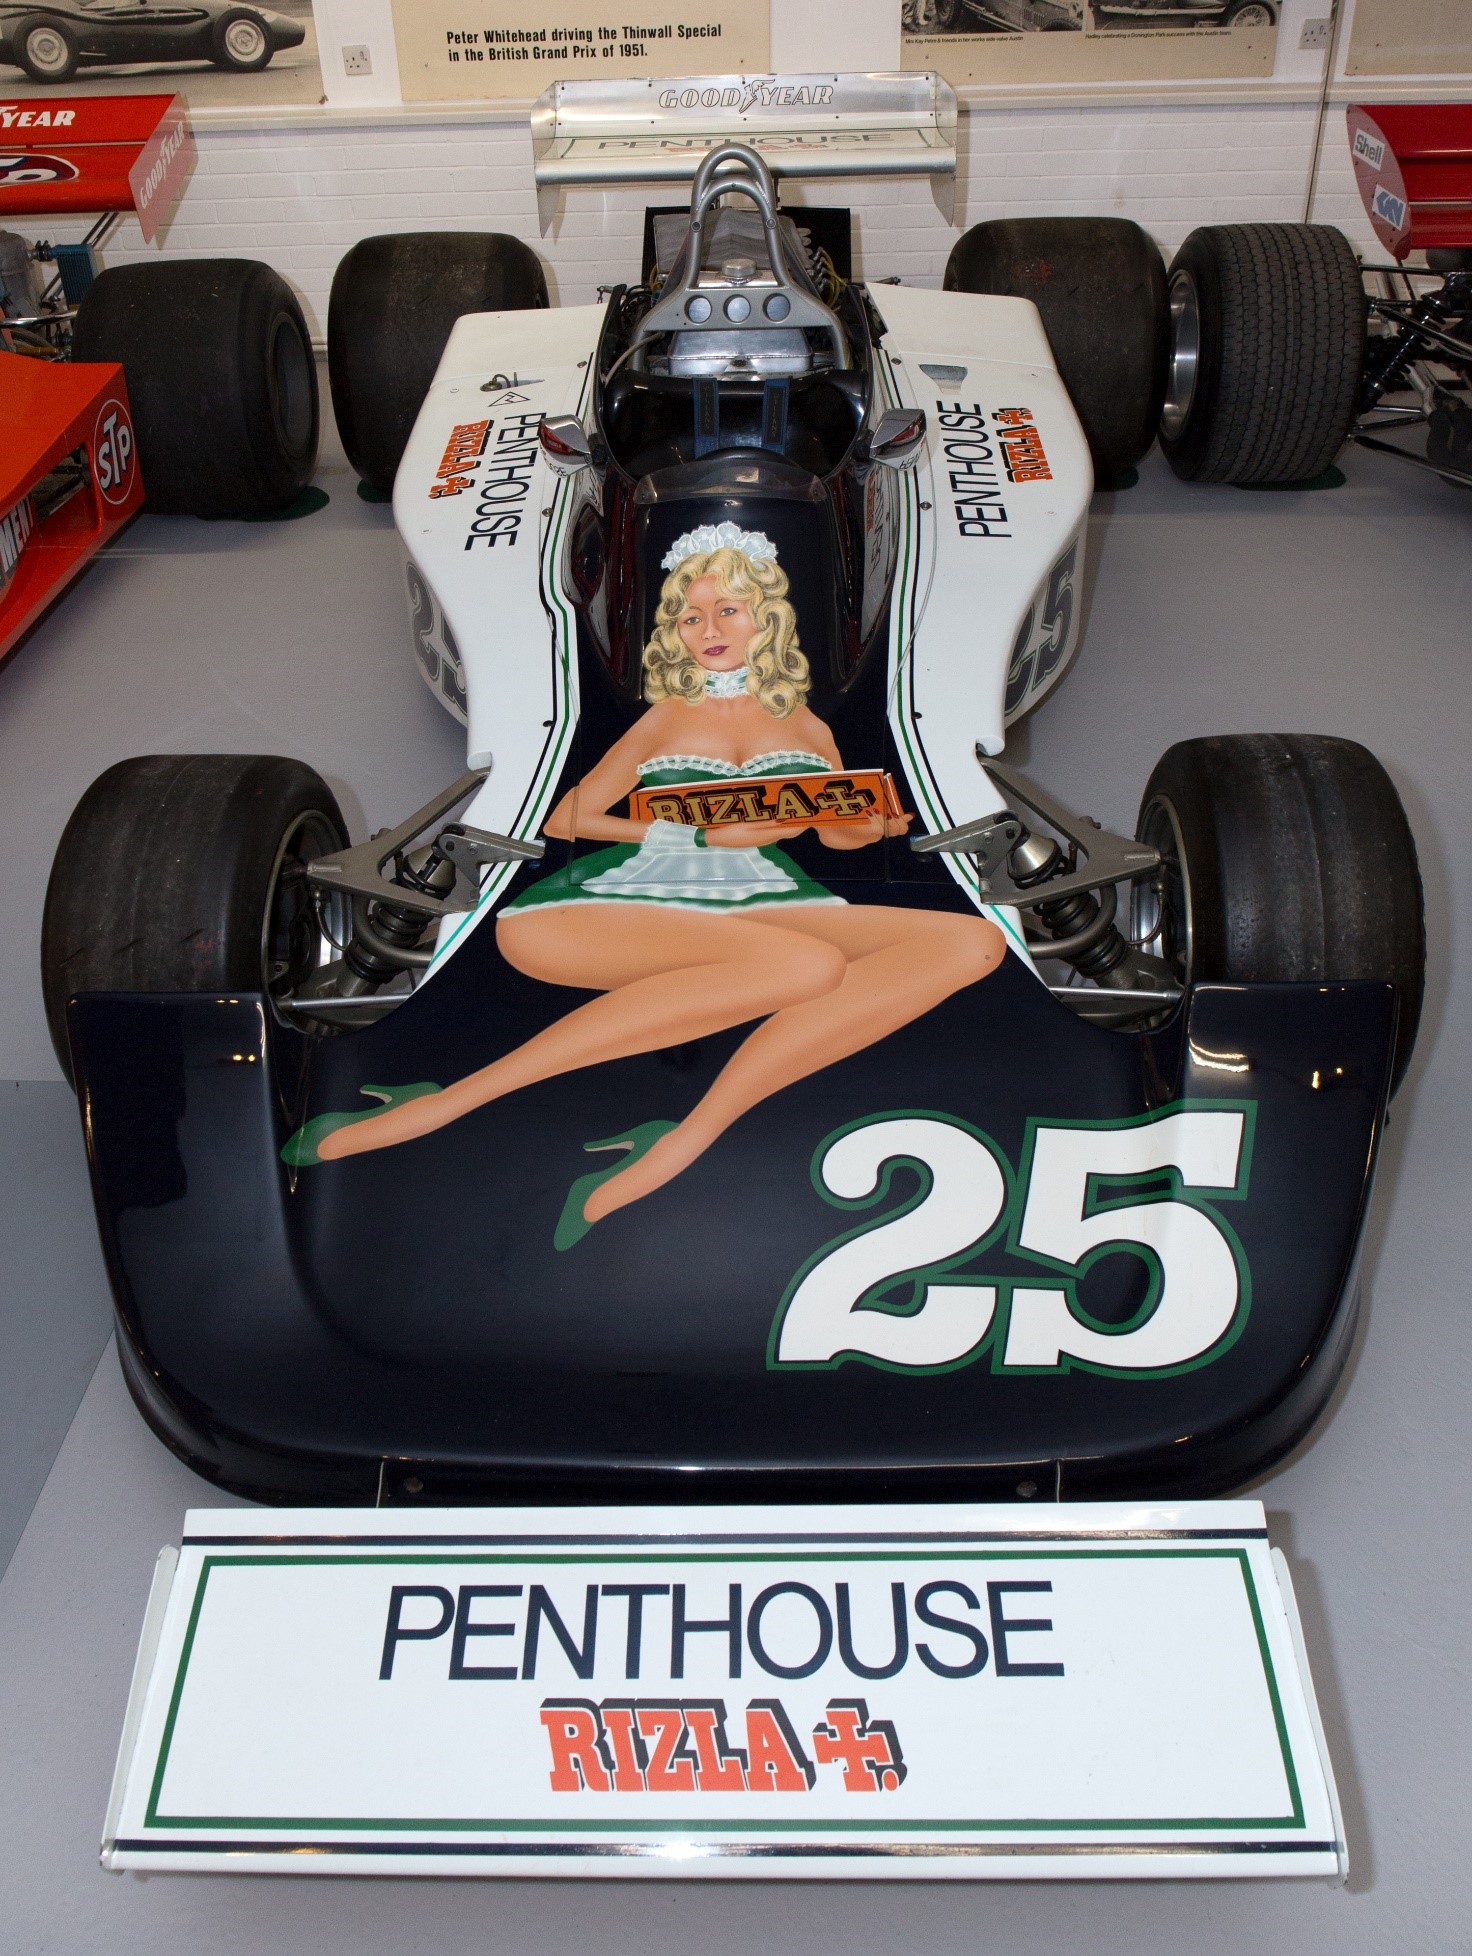 A 1976 Hesketh 308D at Donington on 7 March 2013.